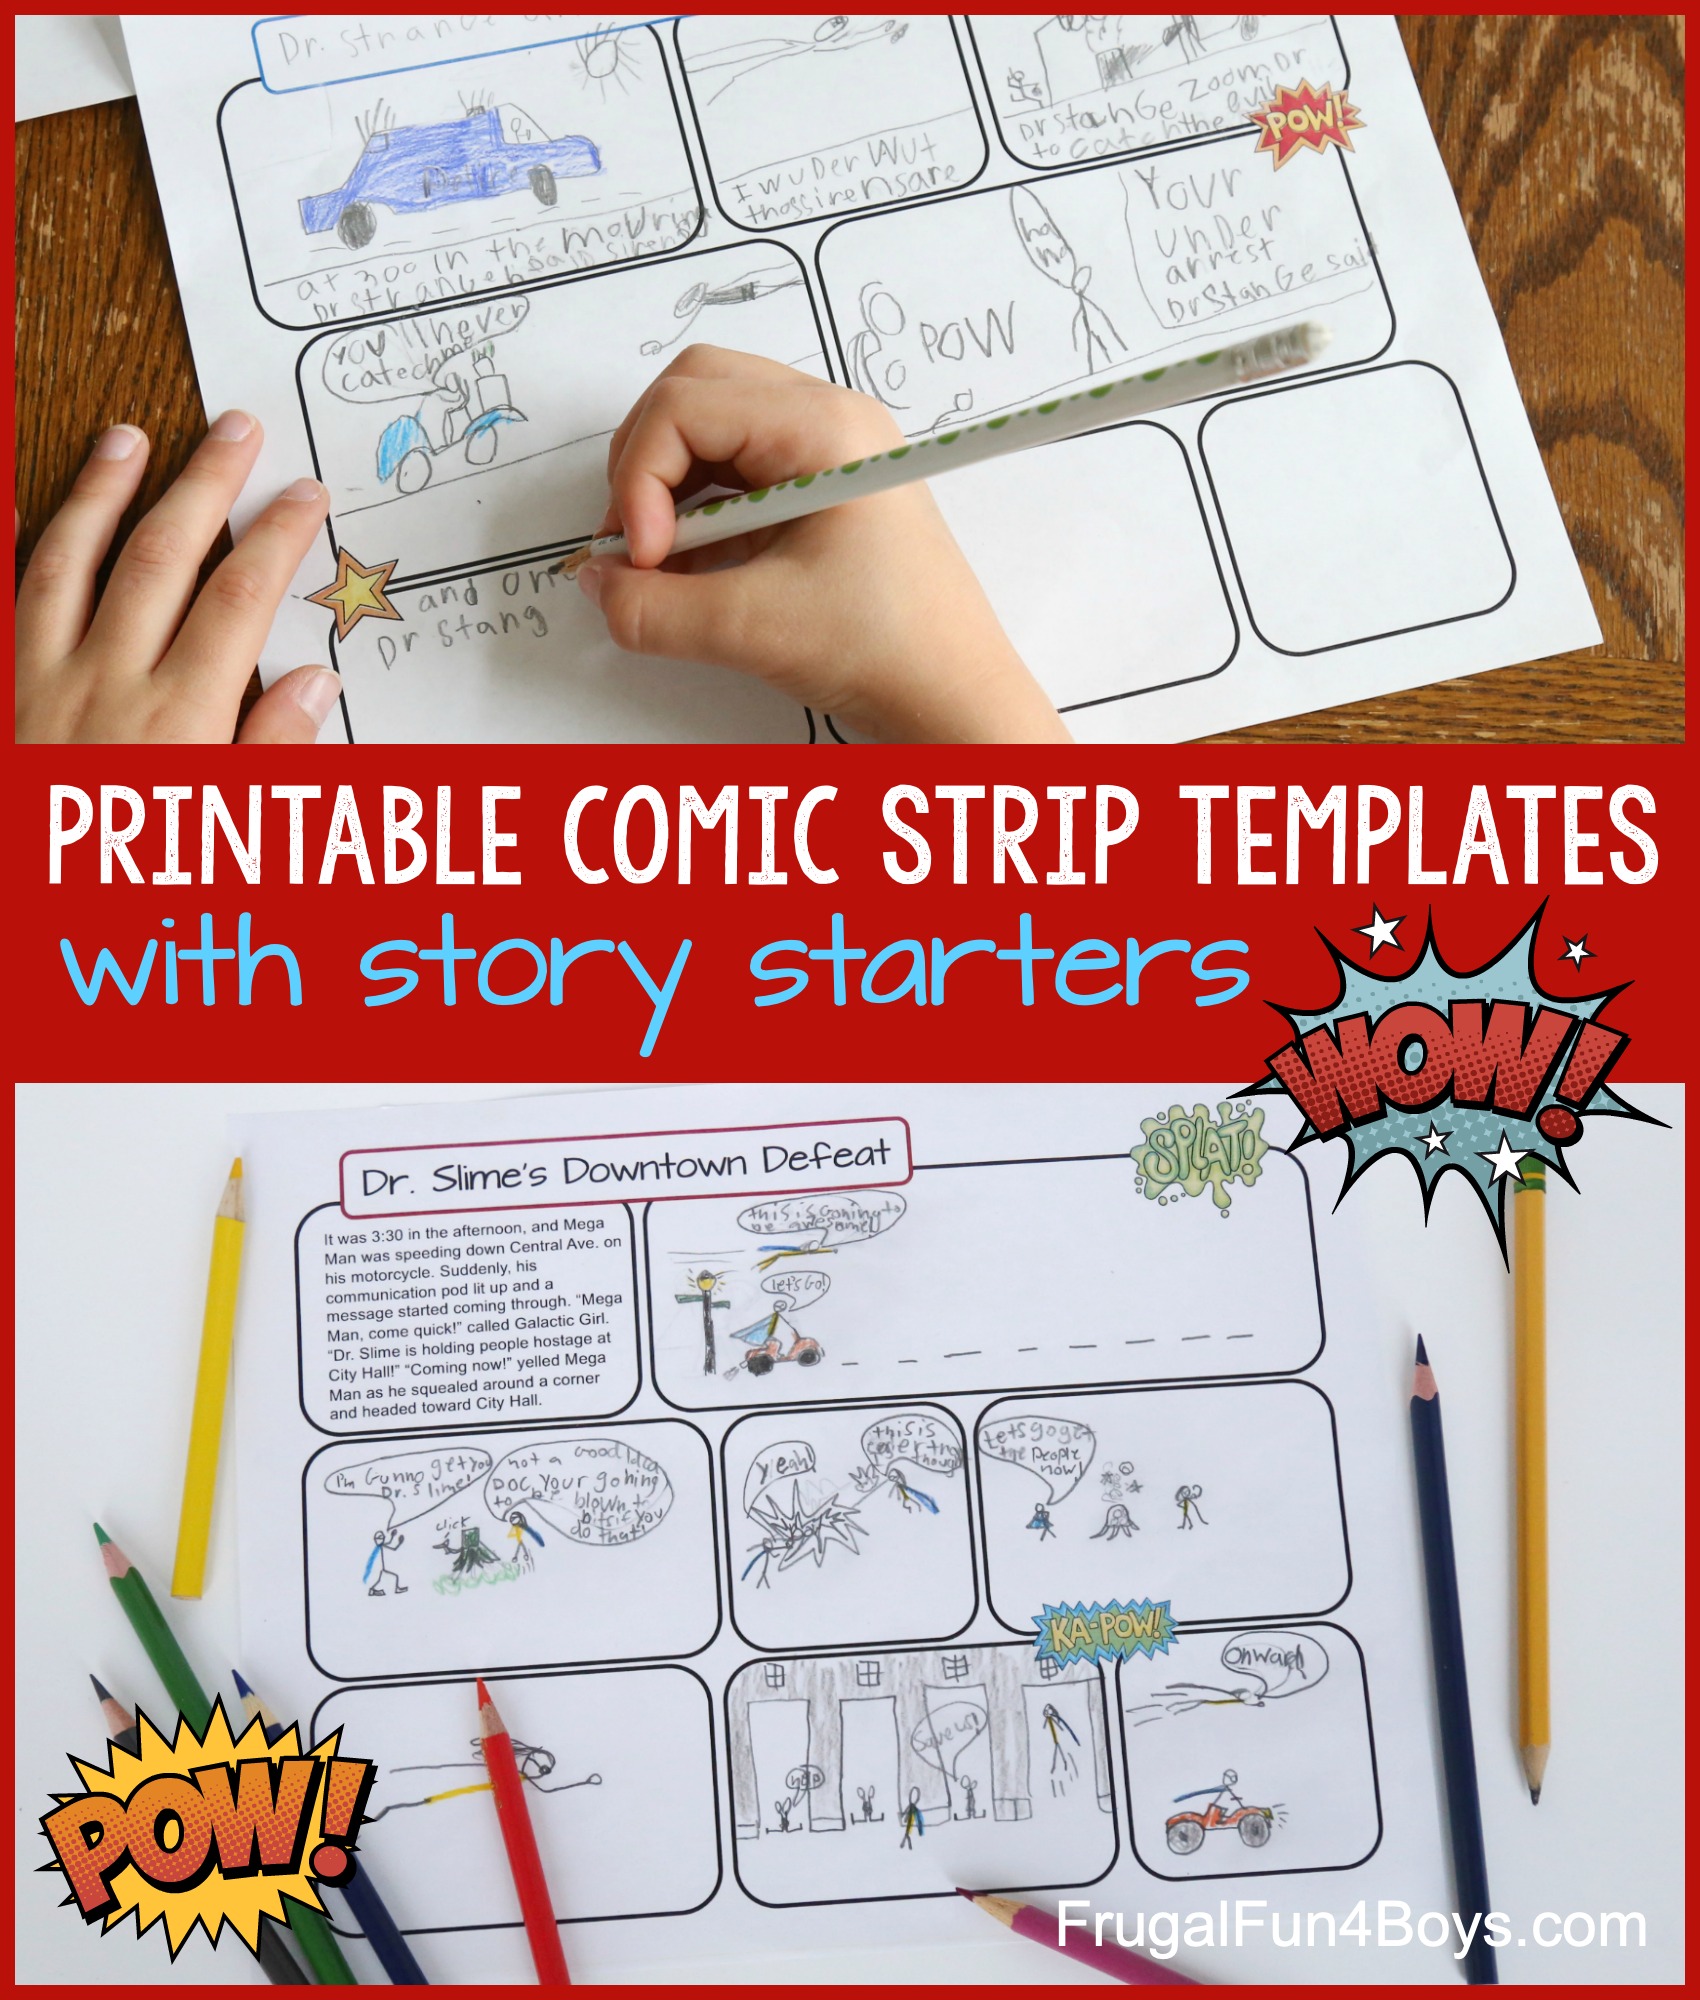 Printable Comic Strip Templates with Story Starters - Frugal Fun 